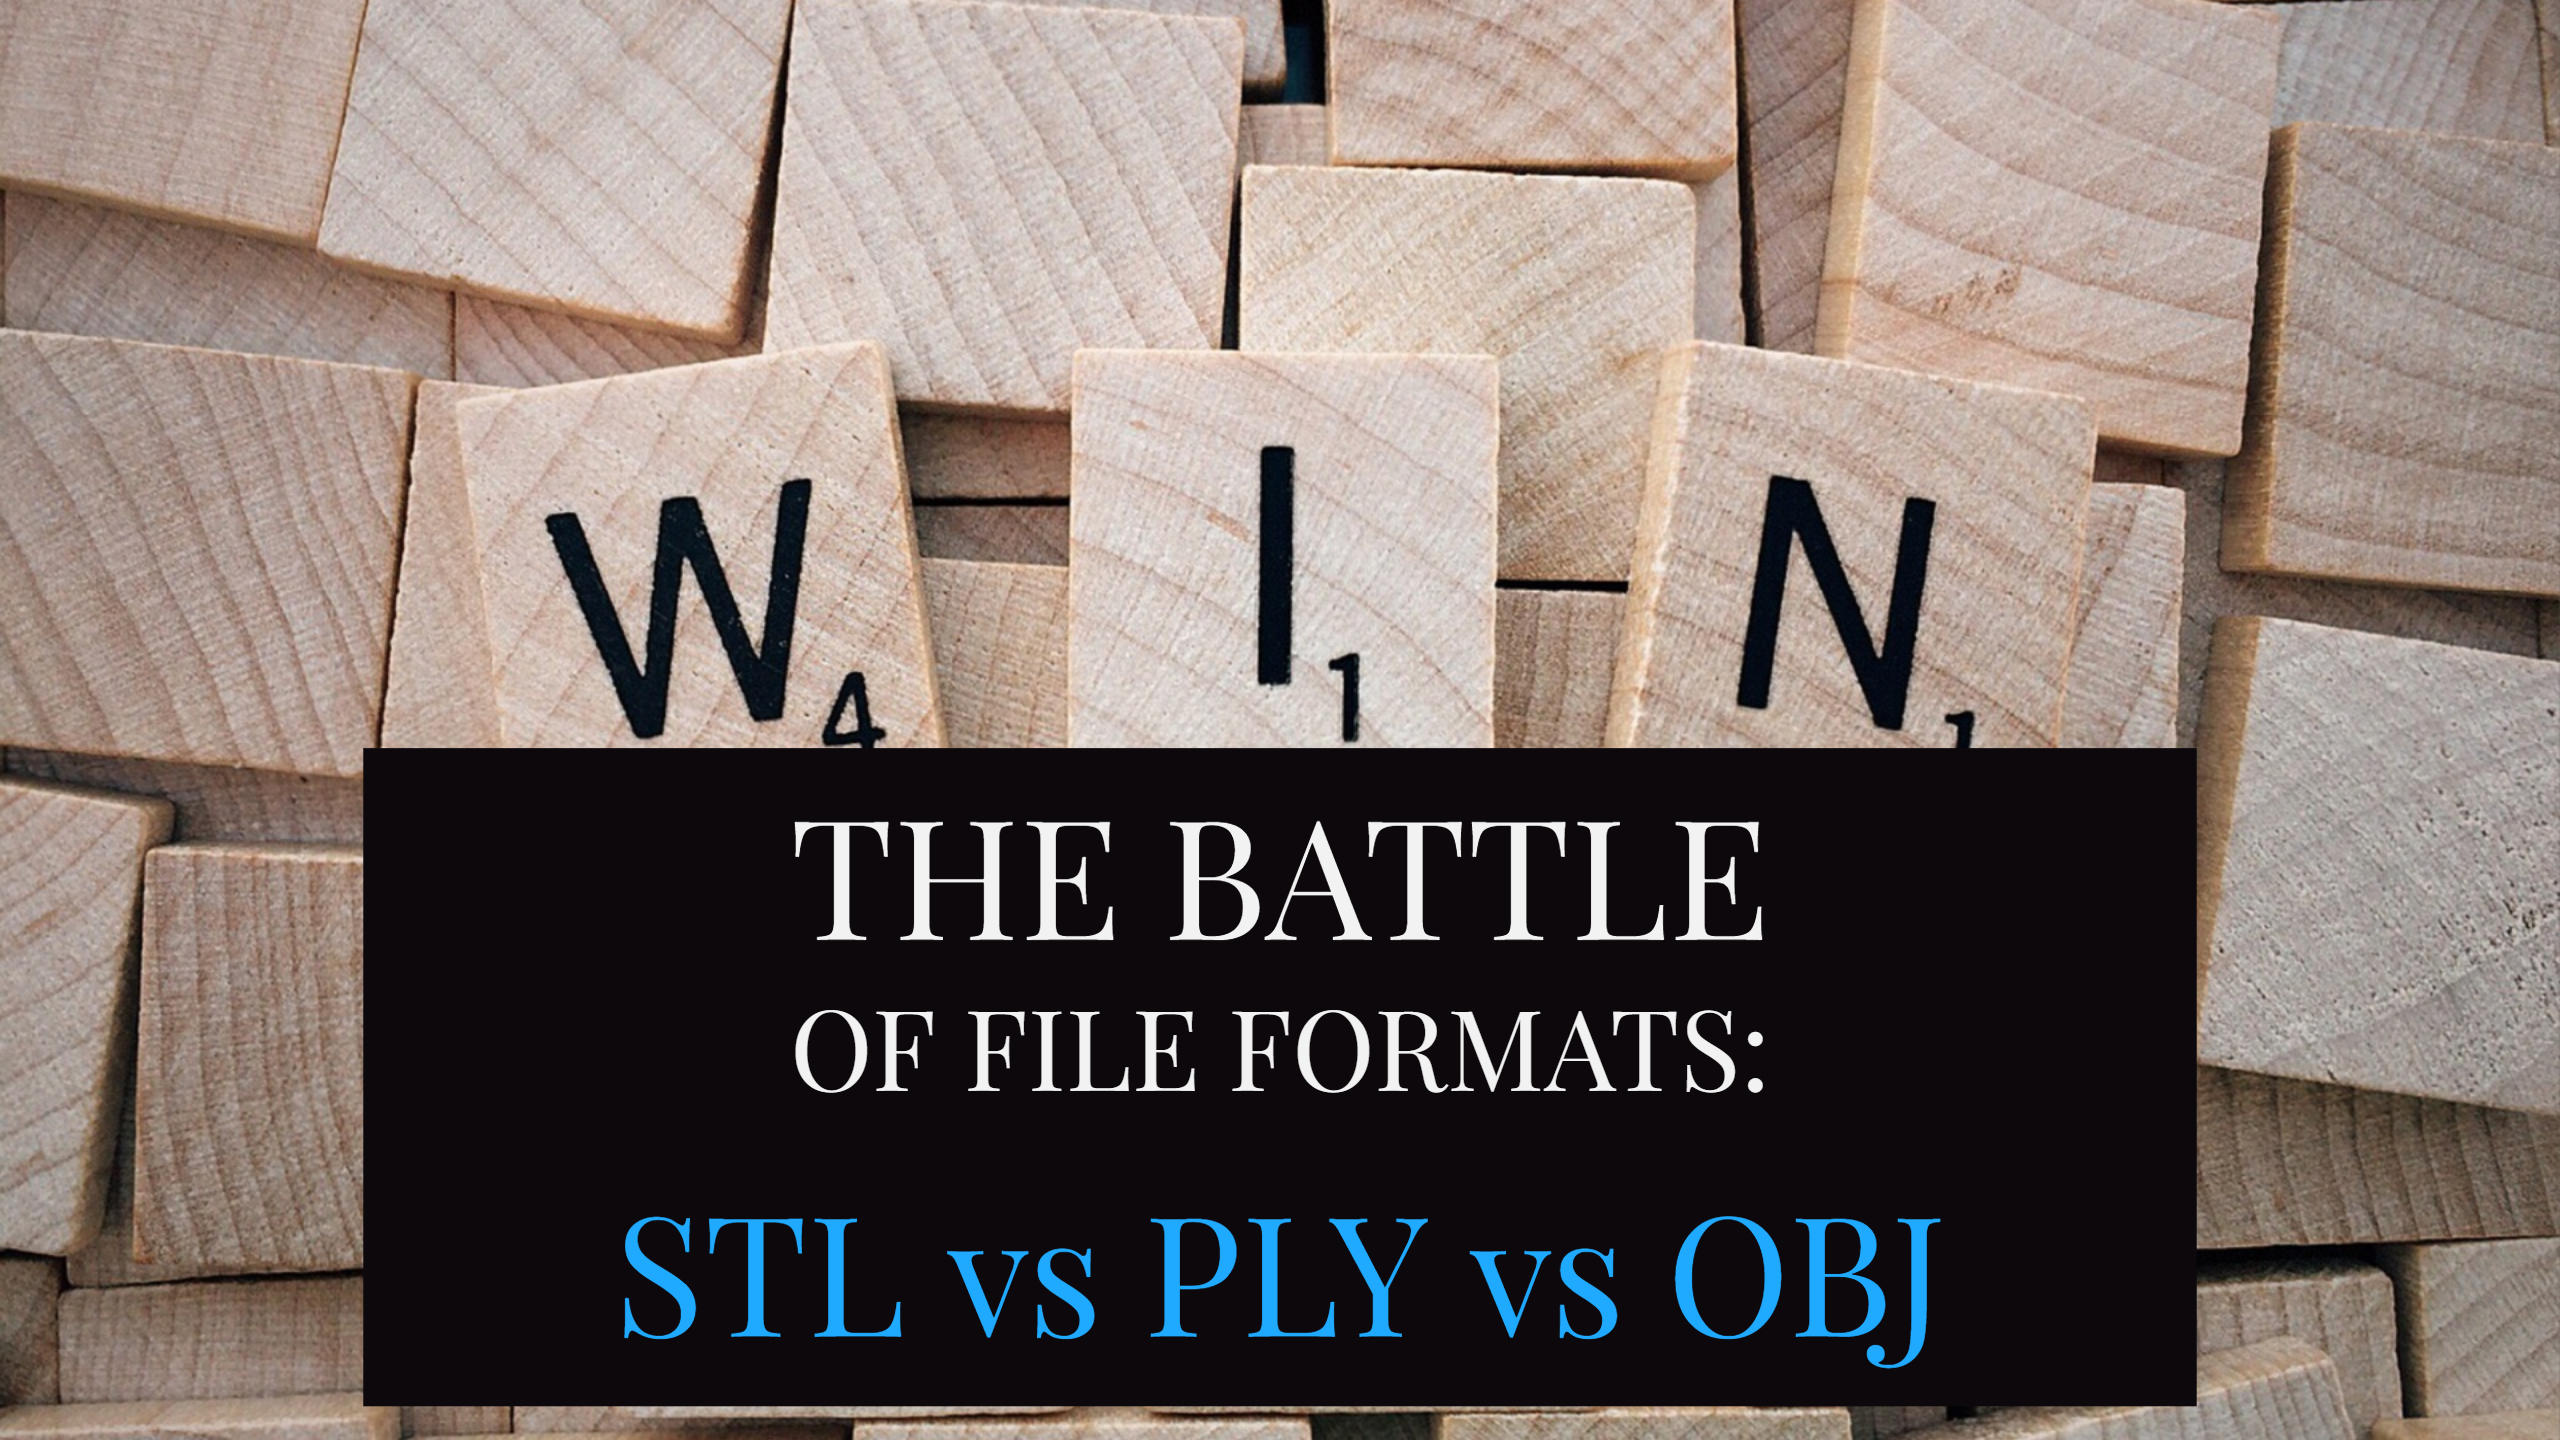 The Battle of File Formats